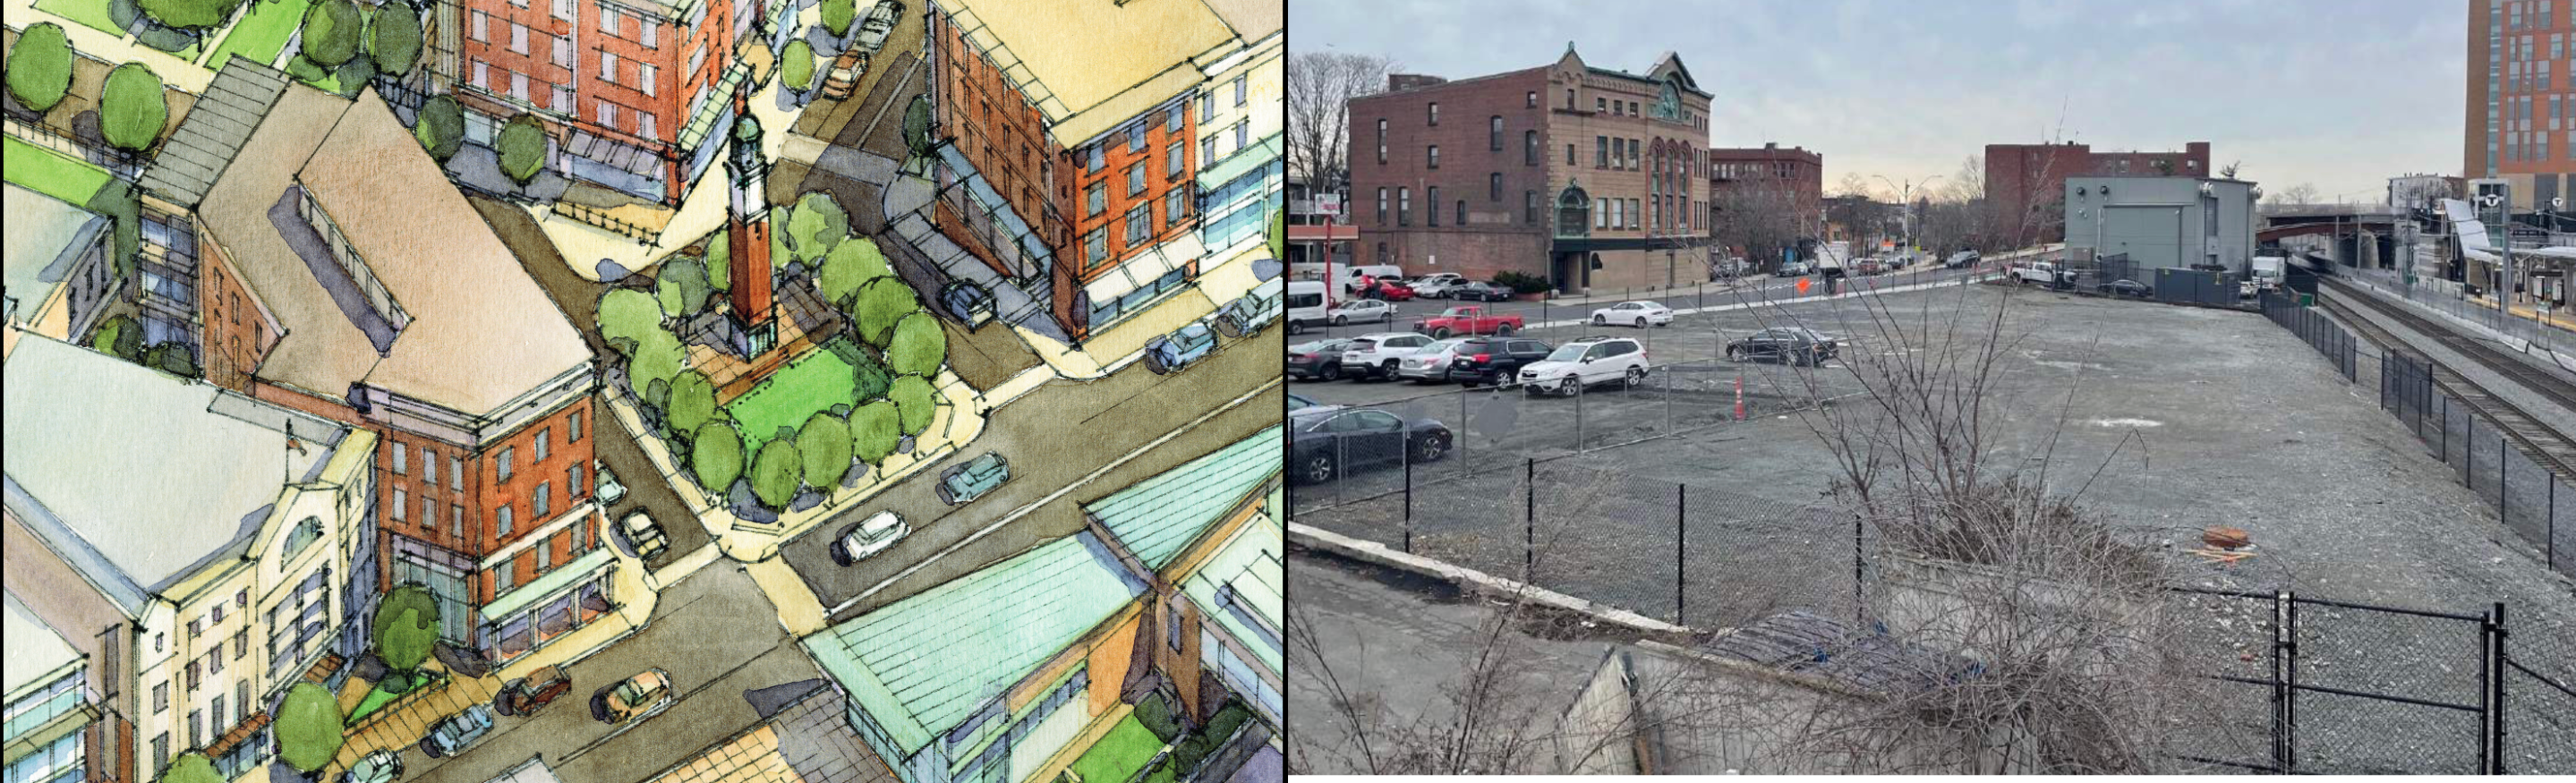 A diptych of images shows an illustrative sketch of the Gilman Square area at left, and a photo of the same area at right. The sketch shows proposed new buildings that were envisioned in a 2014 neighborhood plan. The photo, taken in 2023, shows a large gravel lot with a handful of parked cars in it.